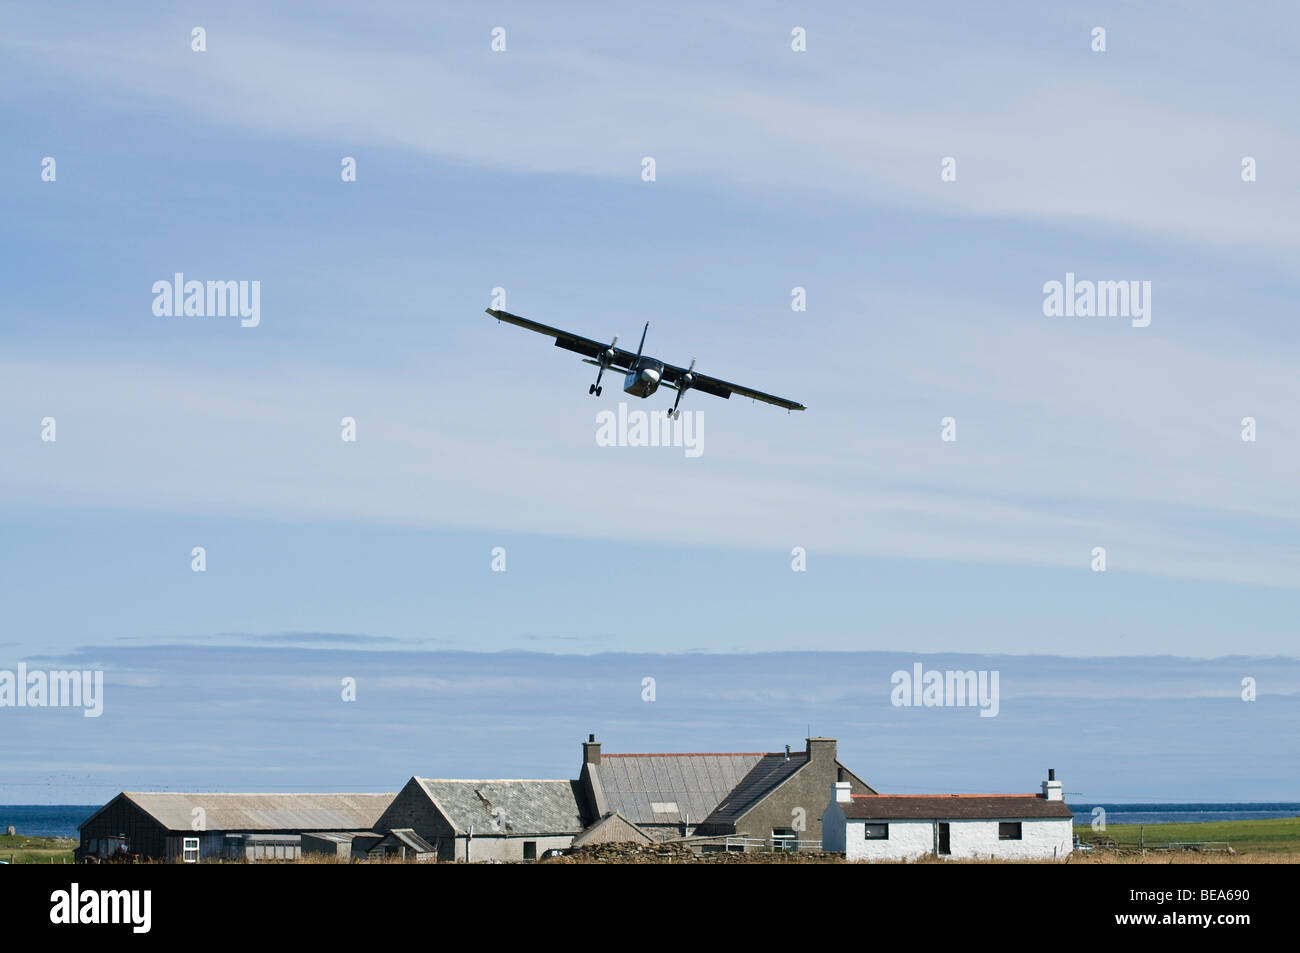 dh Britten Norman Islander NORTH RONALDSAY ORKNEY ISLES Loganair airplane above cottage small plane landing island house remote Stock Photo